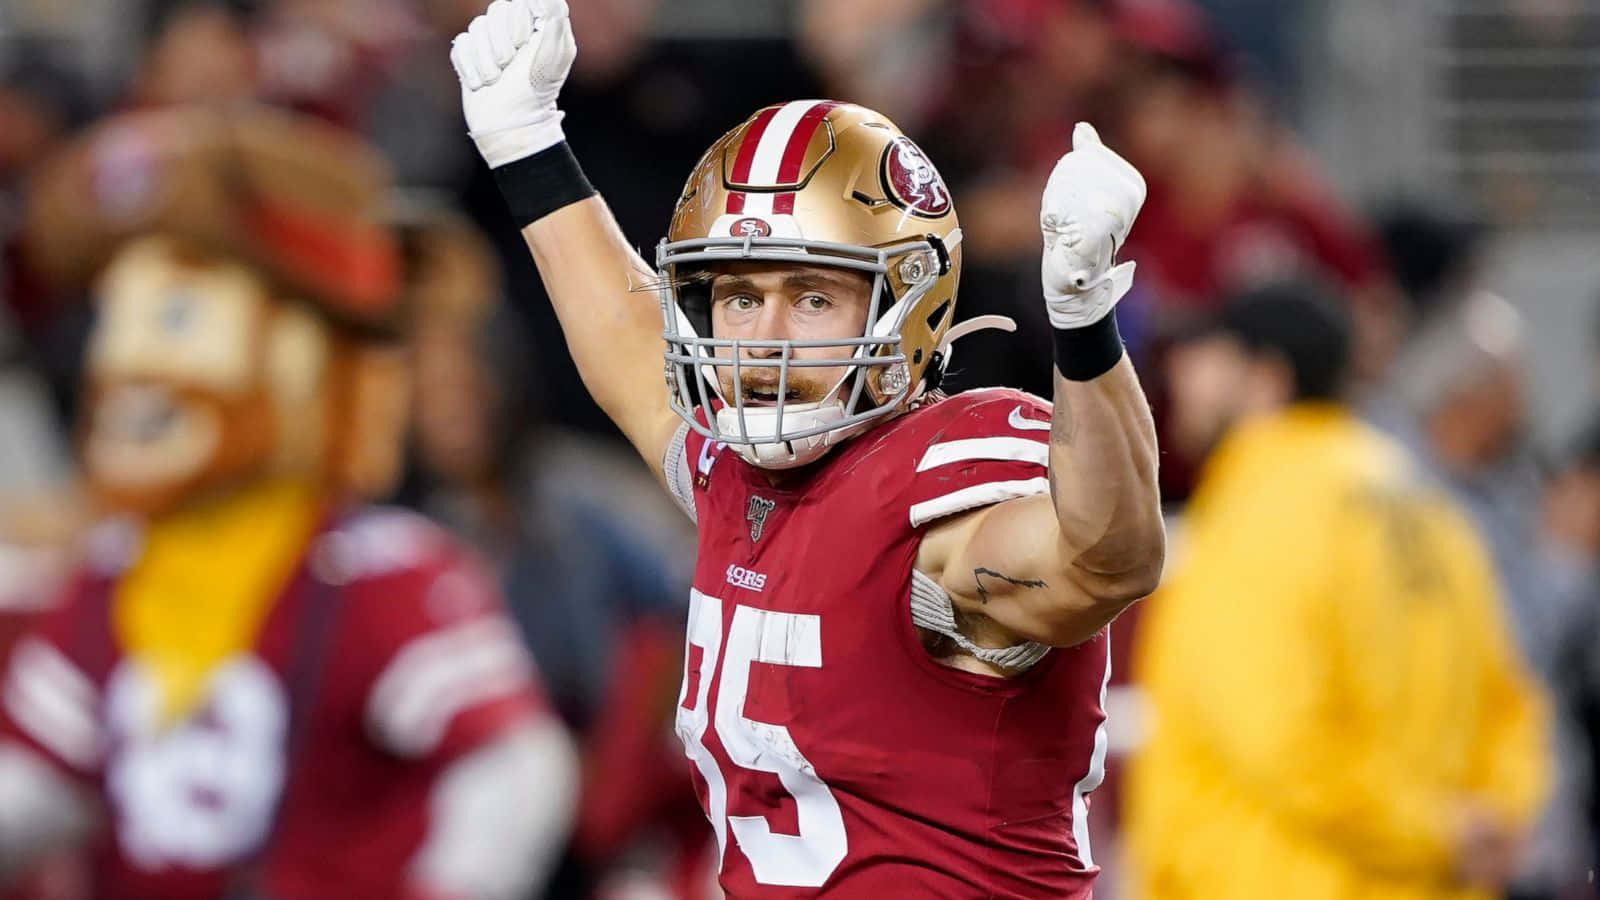 San Francisco 49ers tight end George Kittle adjusting to catch a pass during a game. Wallpaper